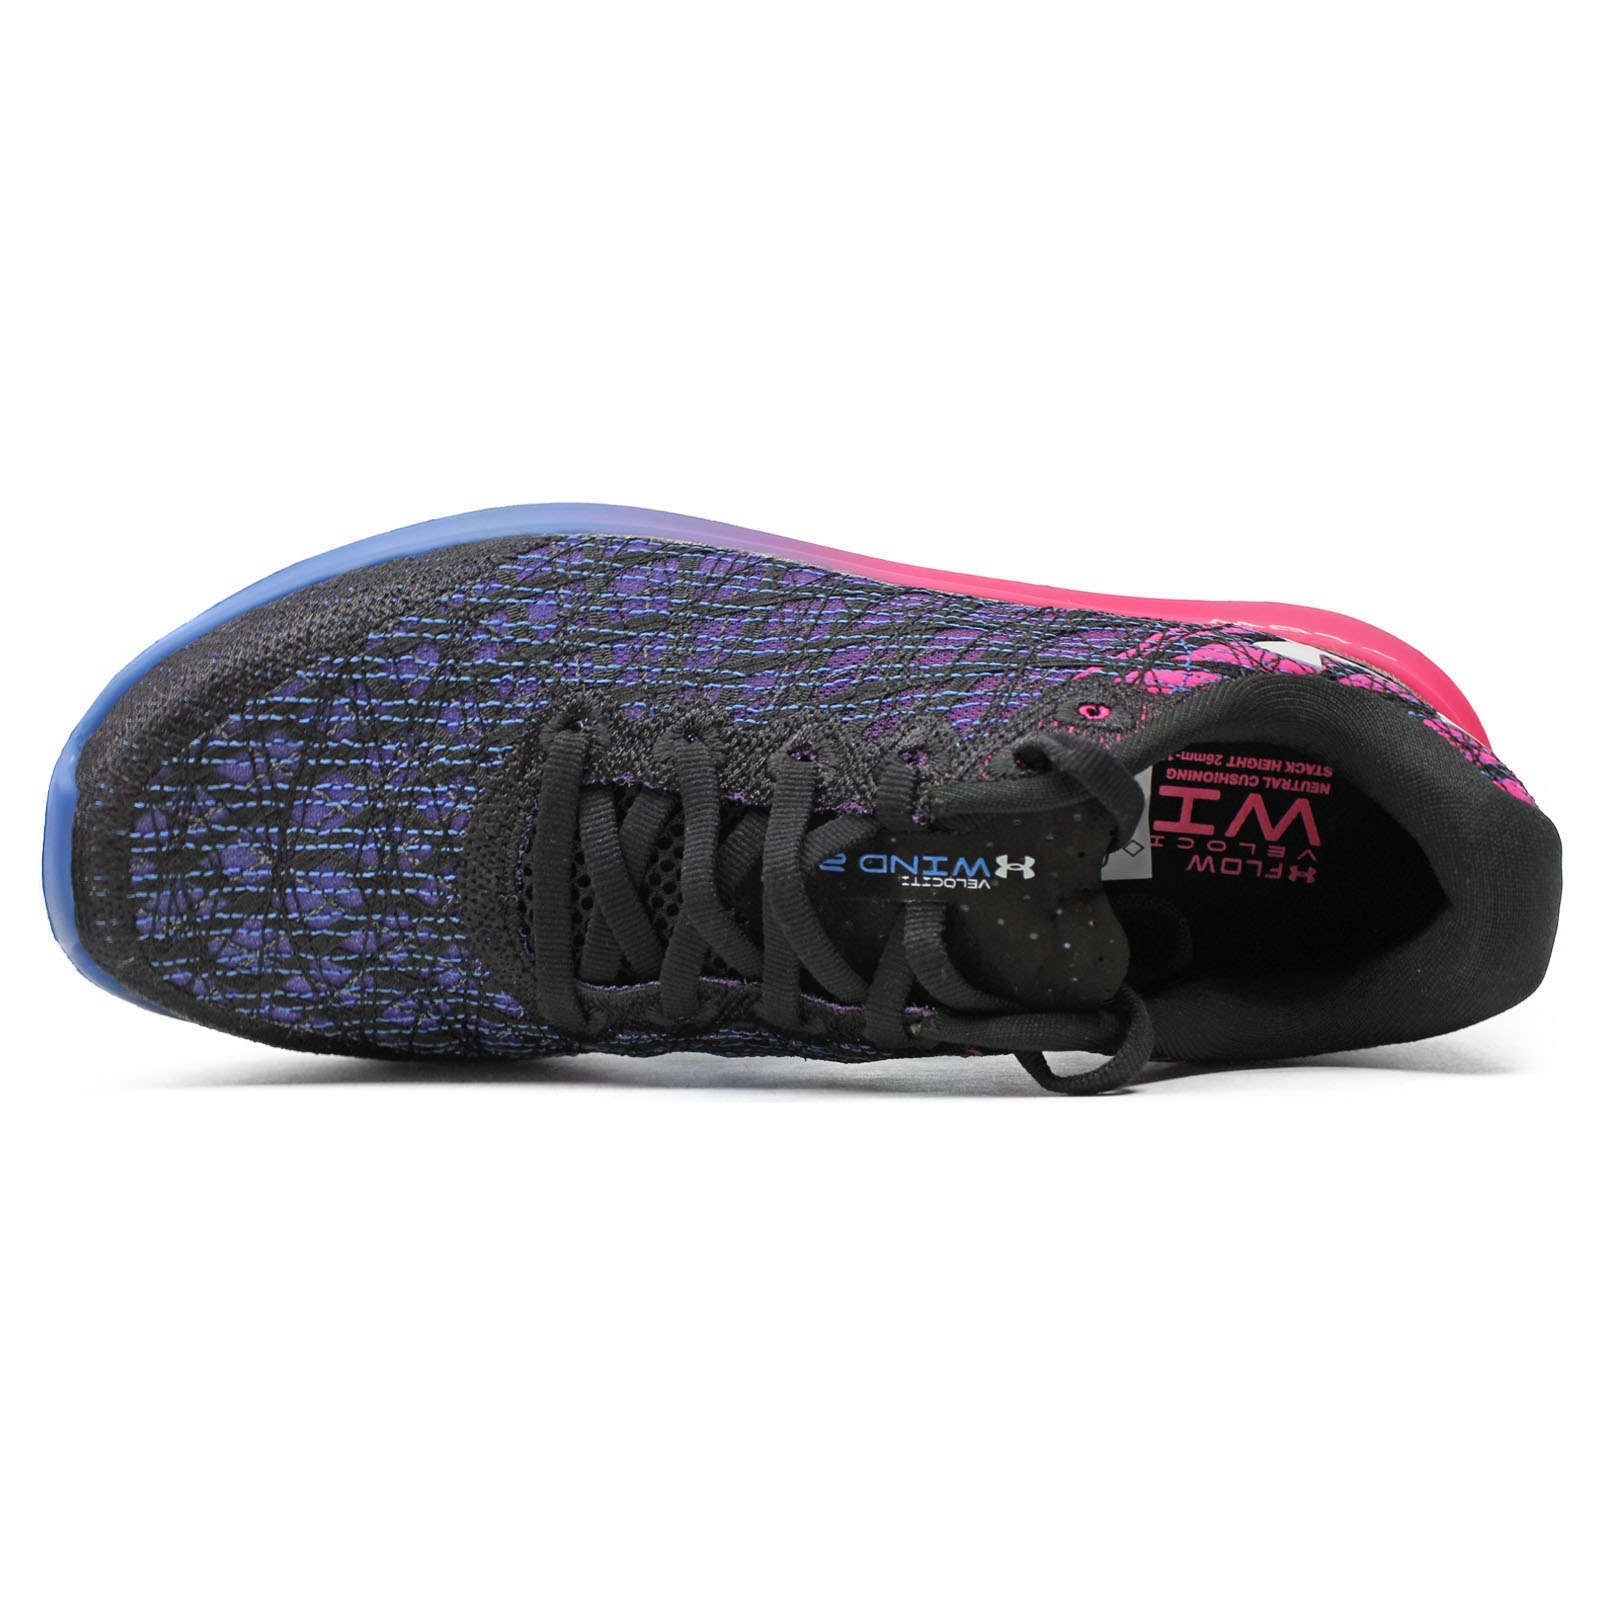 Under Armour Flow Velociti Wind 2 Synthetic Textile Women's Low-Top Sneakers#color_black pink